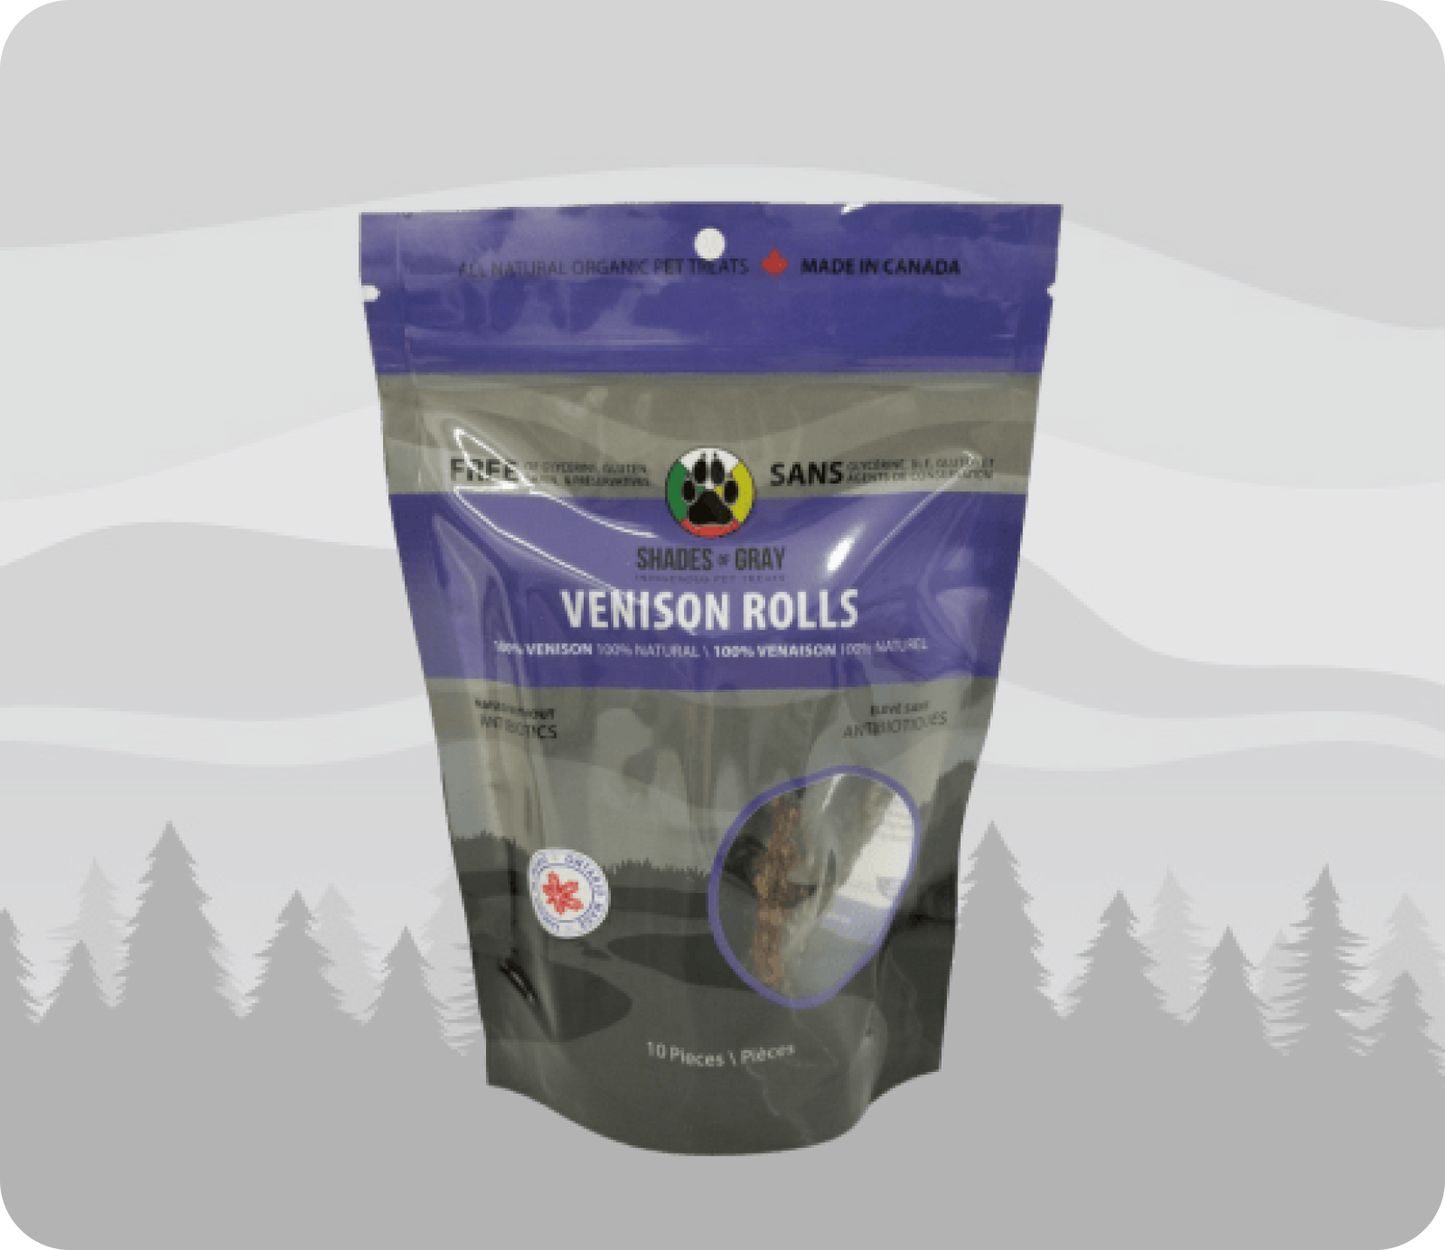 Venison Roll pet treats made with organic all natural 100% Venison, for your cats and dogs. Free of Glycerine, Gluten, Grain & Preservatives.